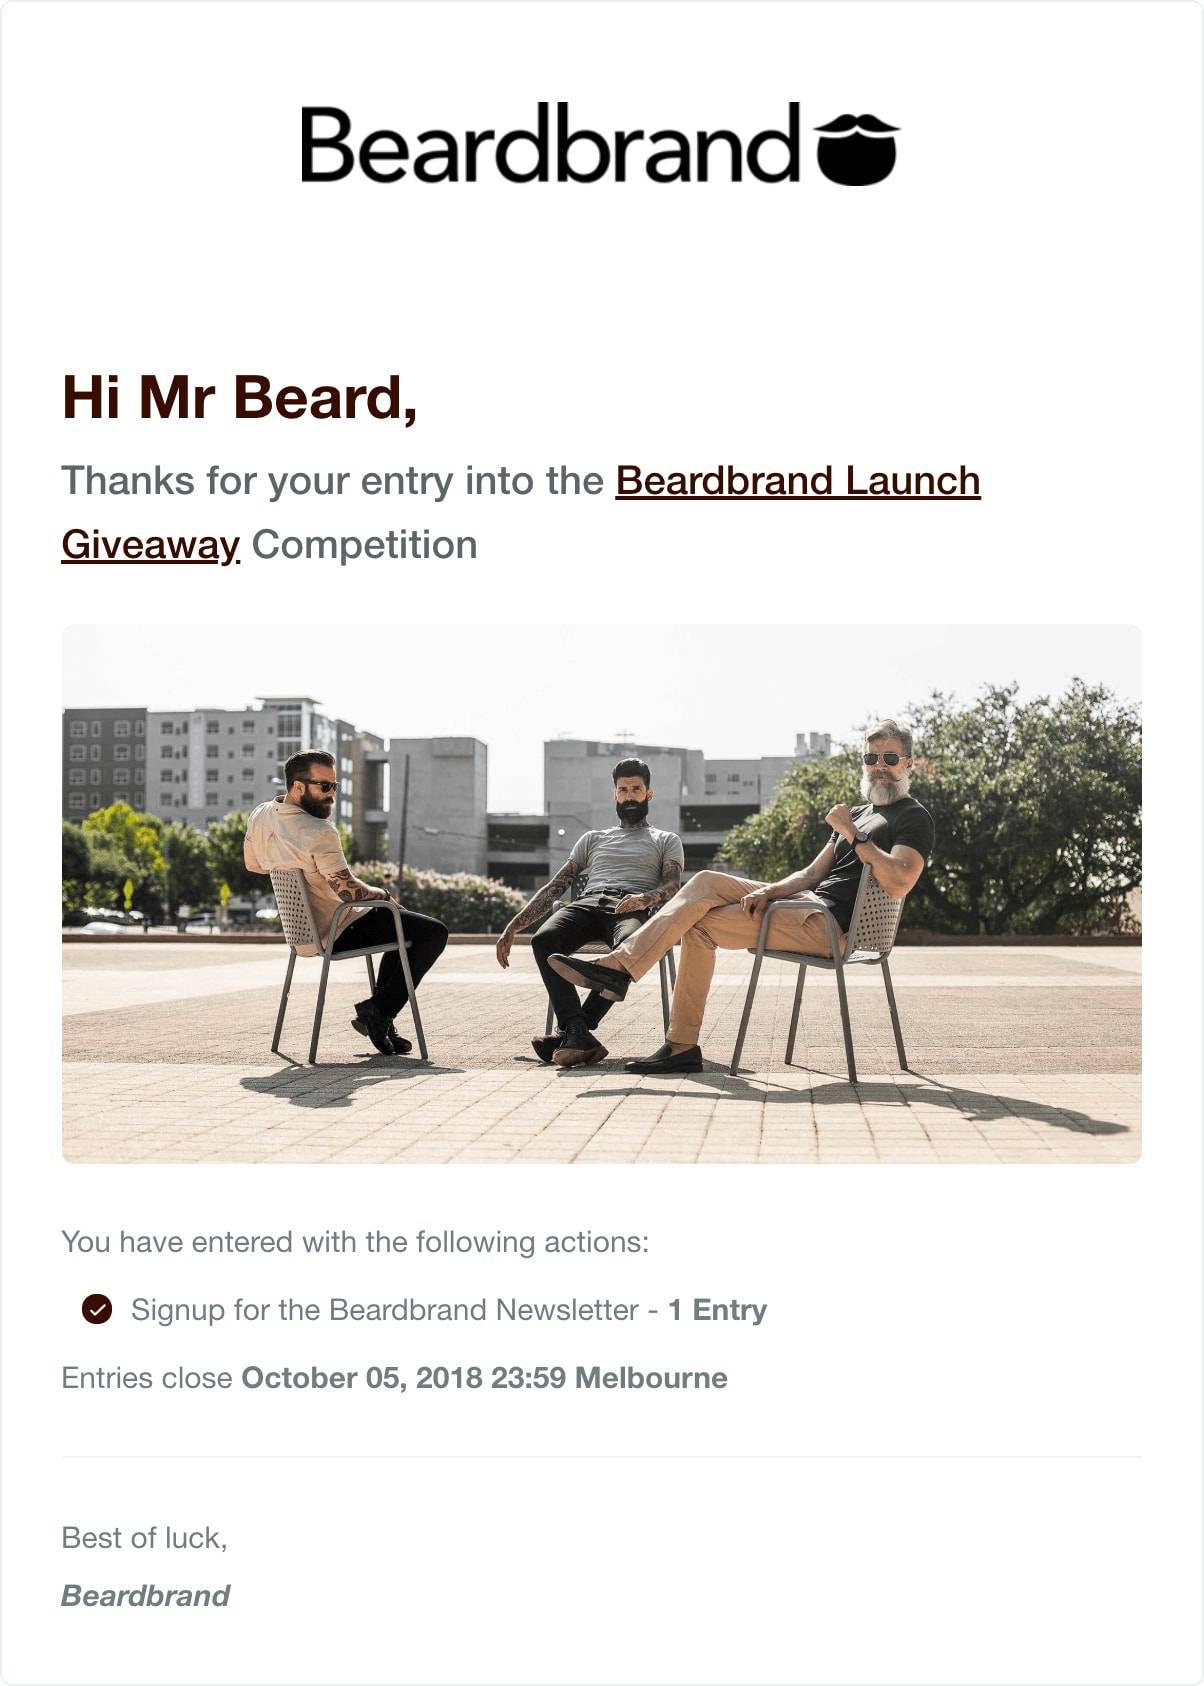 Beardbrand's entry confirmation email sent to entrants